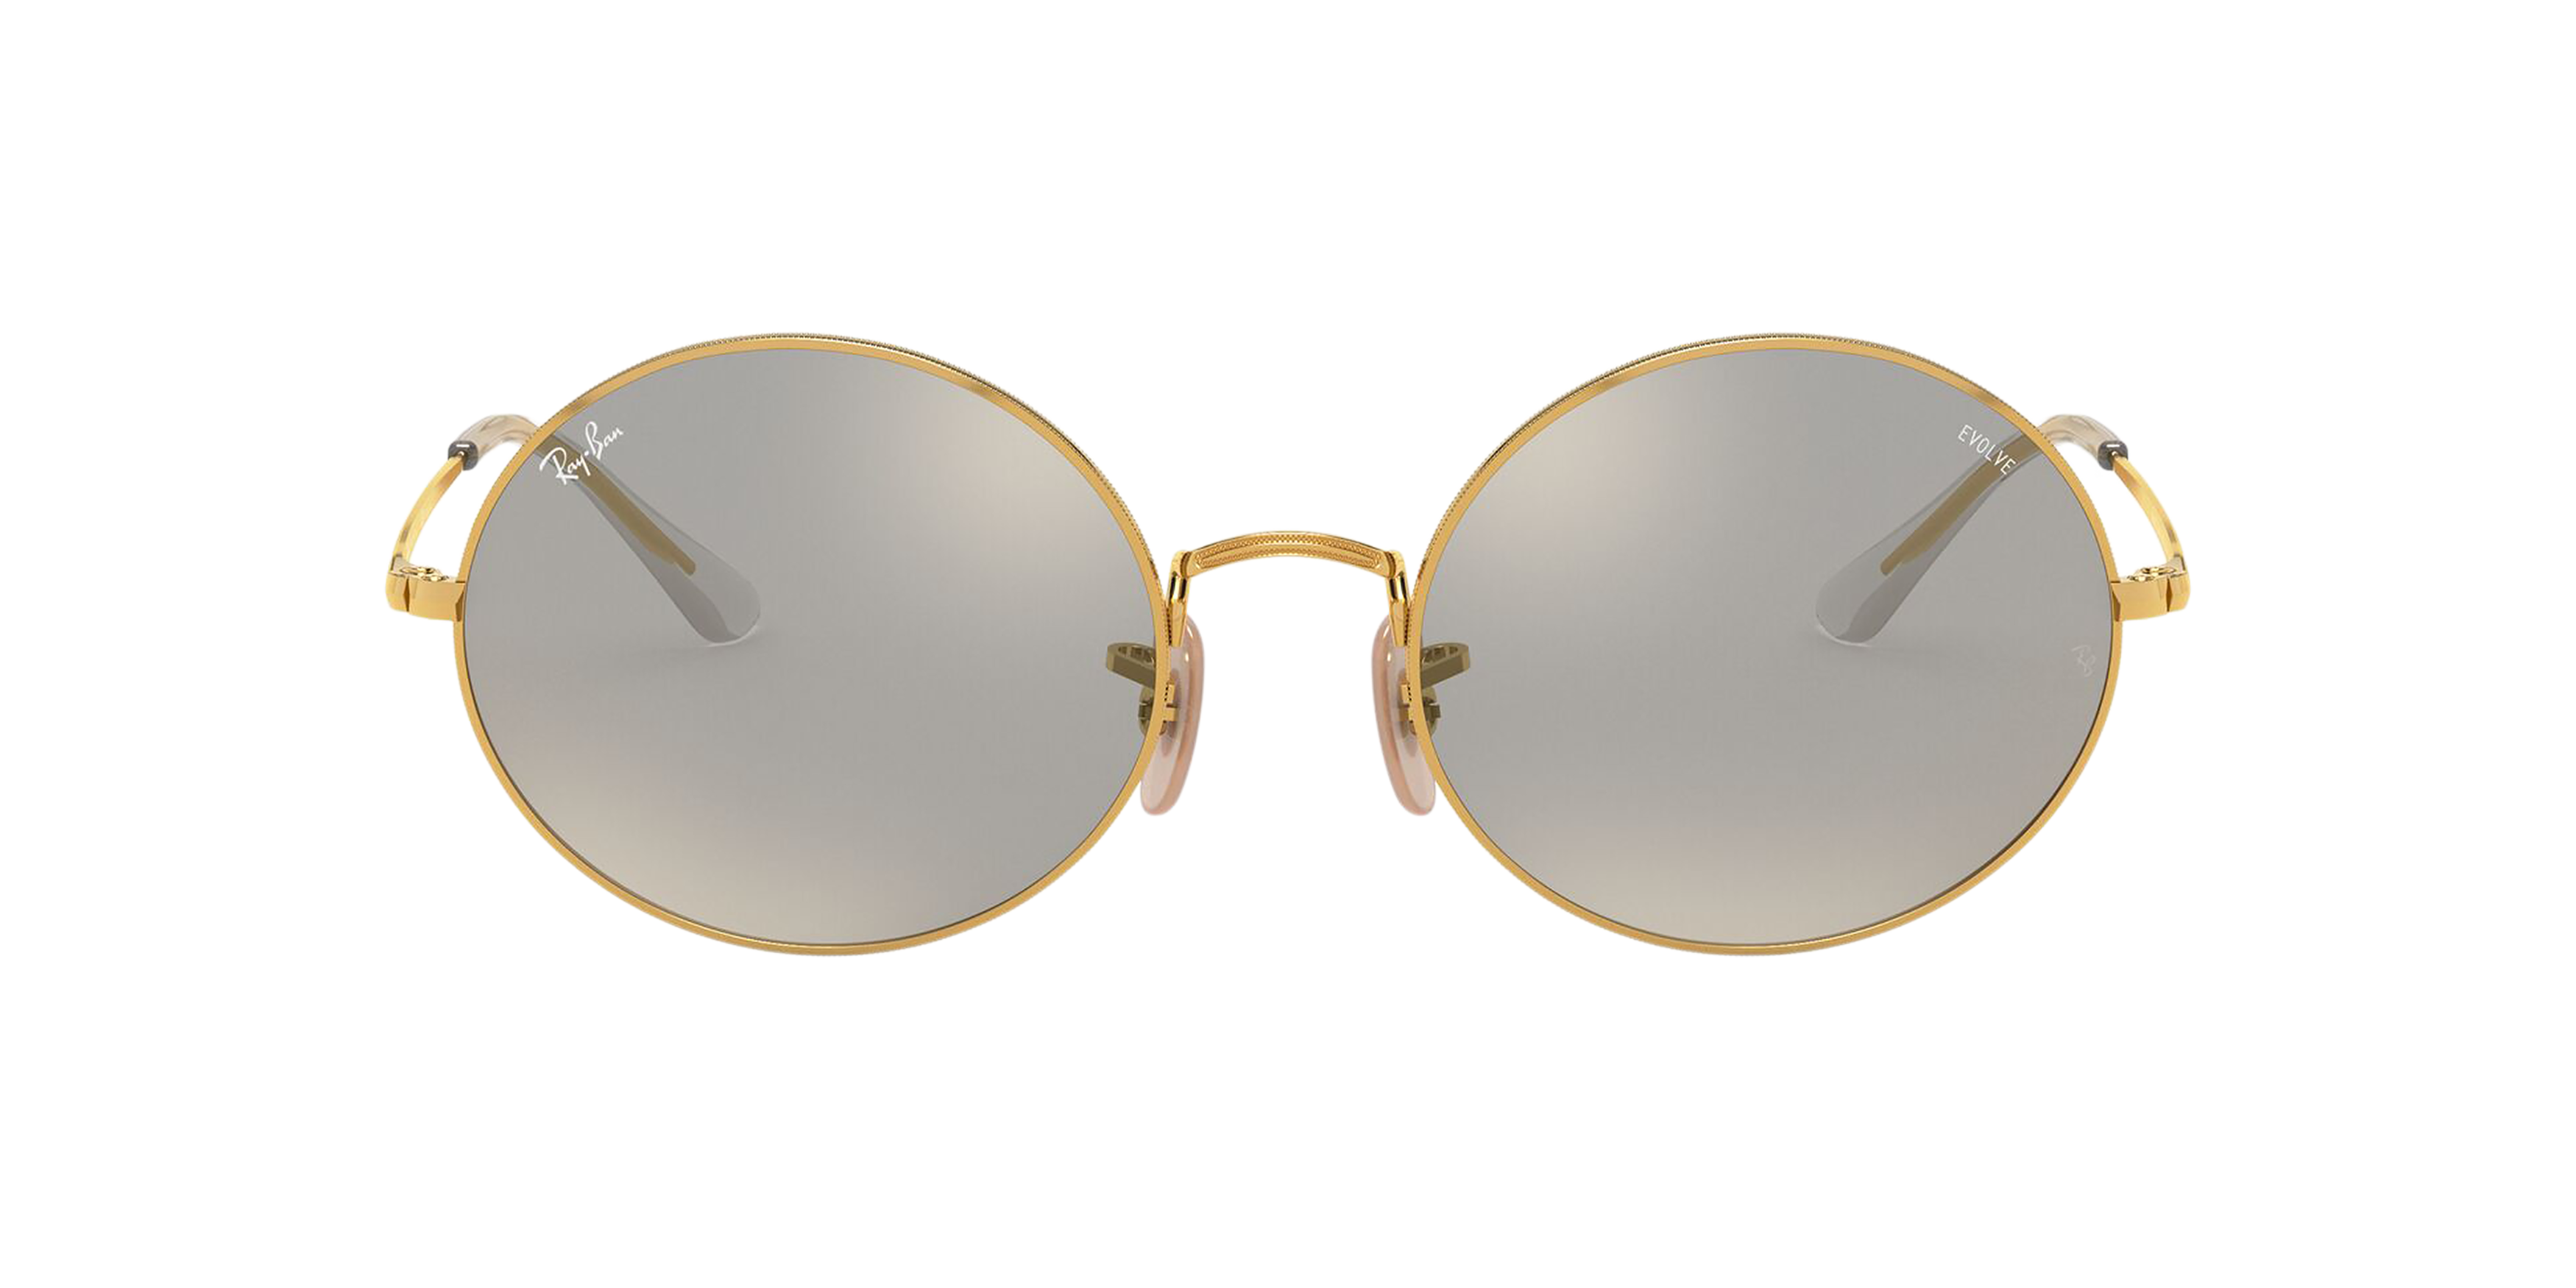 [products.image.front] Ray-Ban Oval 1970 Mirror Evolve RB1970 001/B3